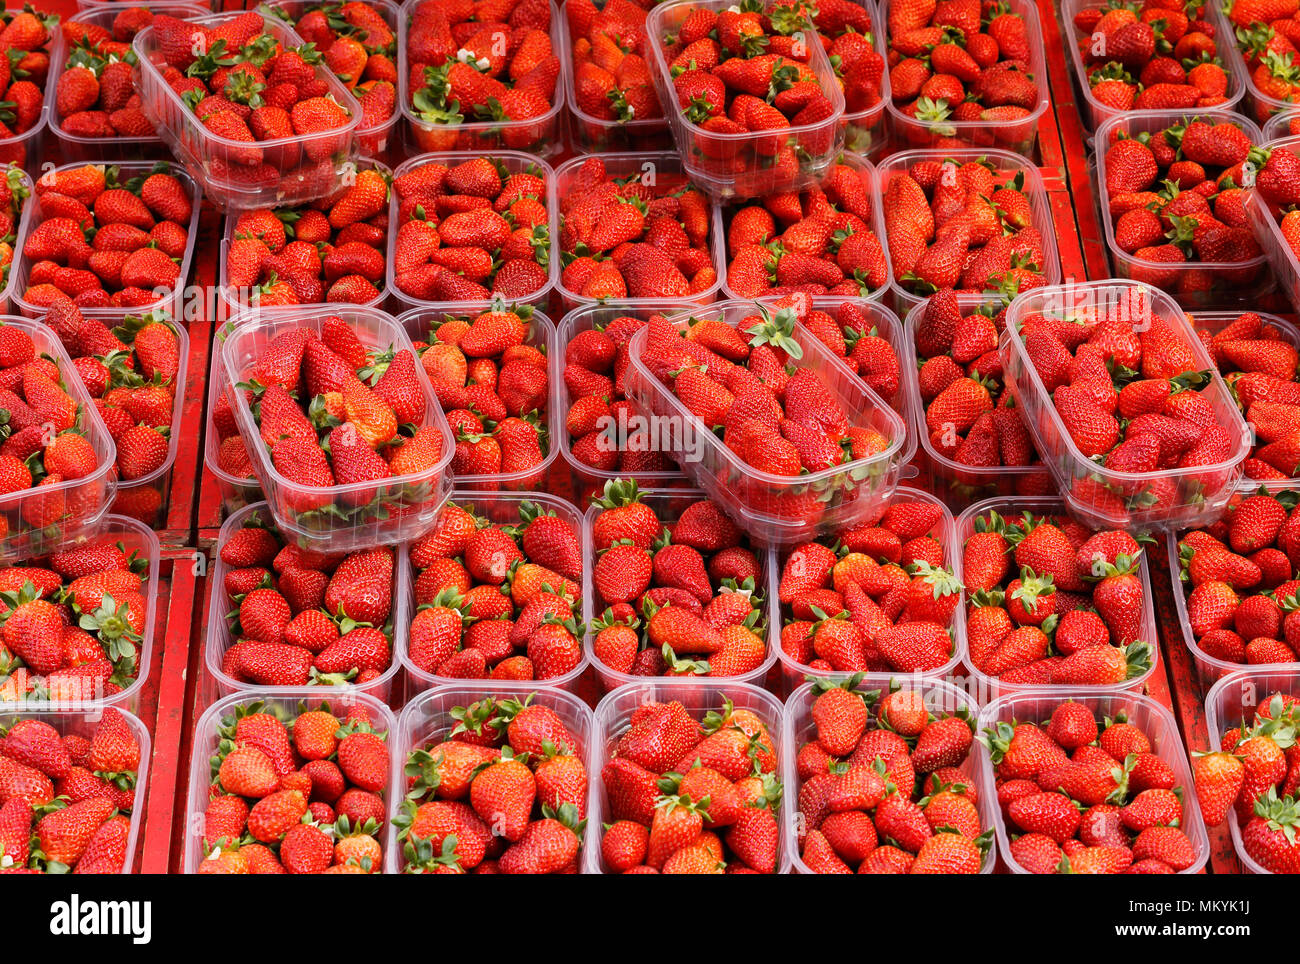 A full framed background with boxes filled with strawberries for sale at the farmers market. Stock Photo